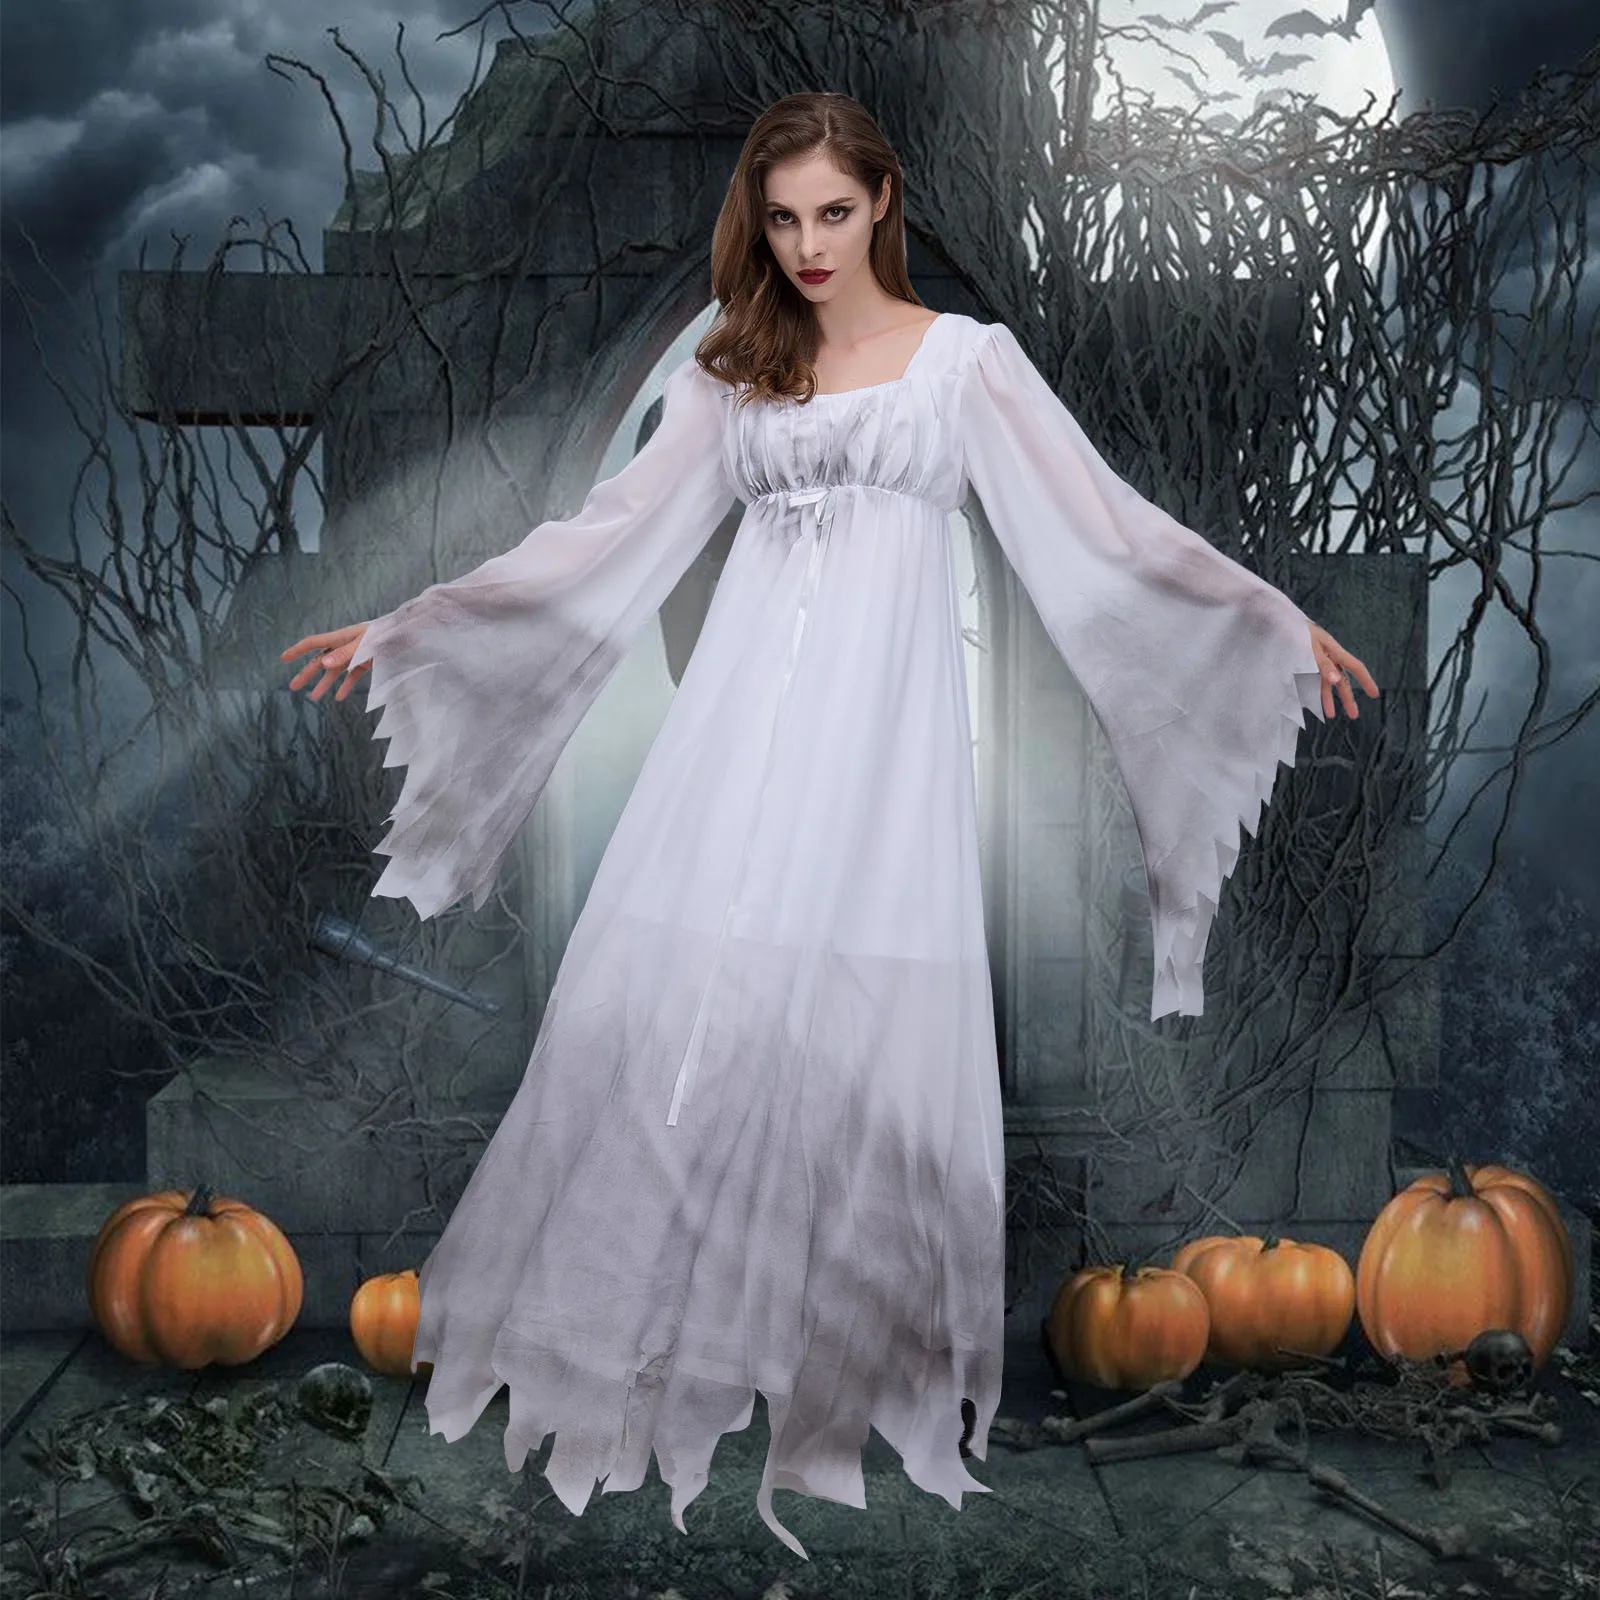 Vampire Lady Dress Outfits Halloween Carnival Women's Halloween Cosplay White Bloodsuck Lace Dress Ghost Costume Gothic Dress